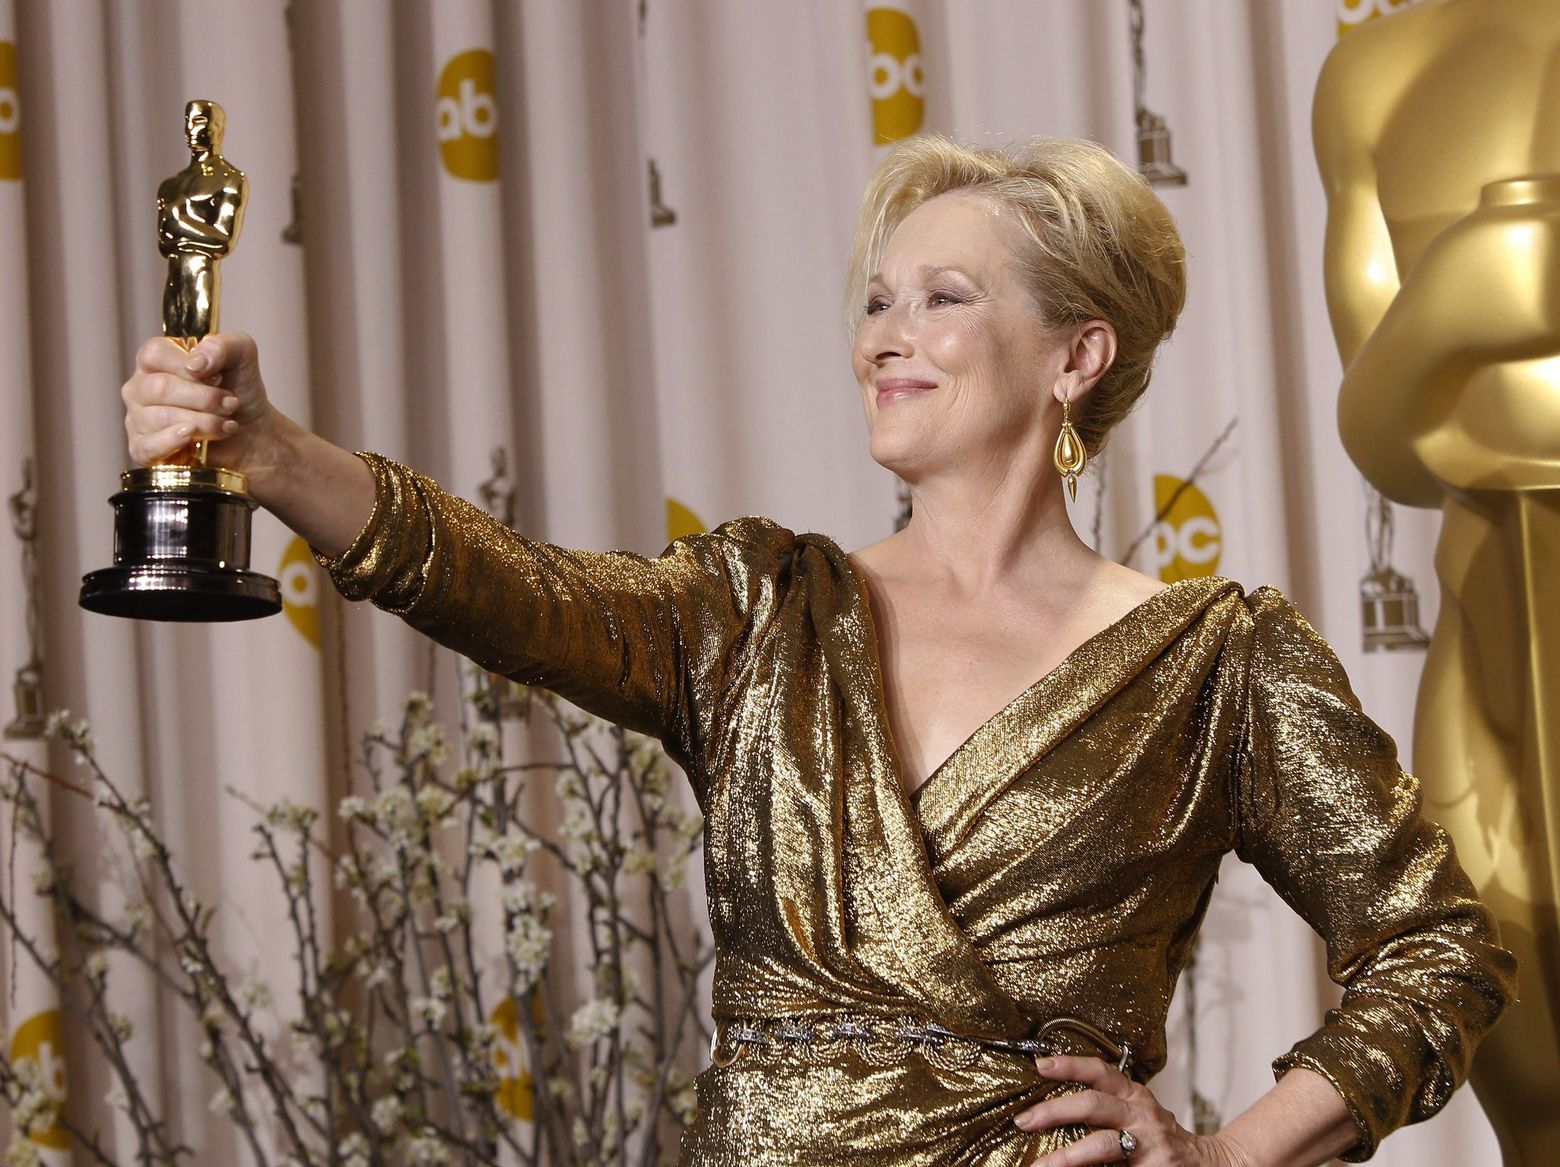 Haiku region Genveje Dear Oscar nominees: Here's how to wow 'em with your acceptance speech |  The Seattle Times